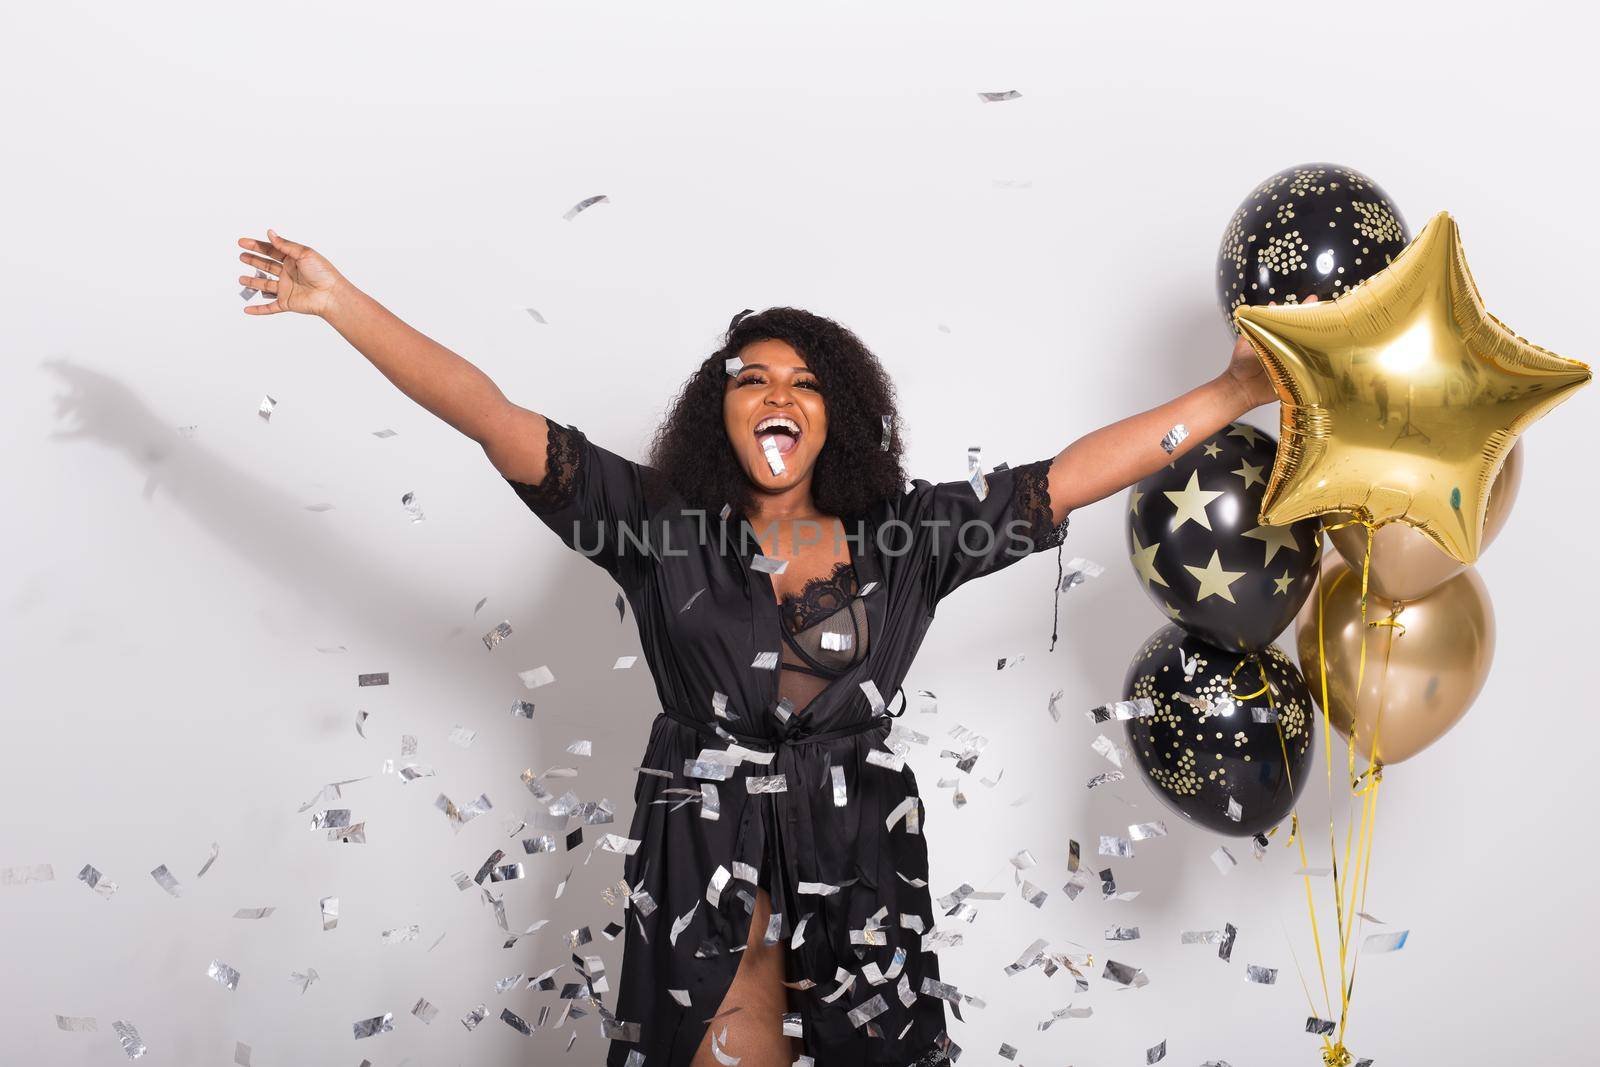 Celebrating happiness, young woman dancing with big smile throwing confetti